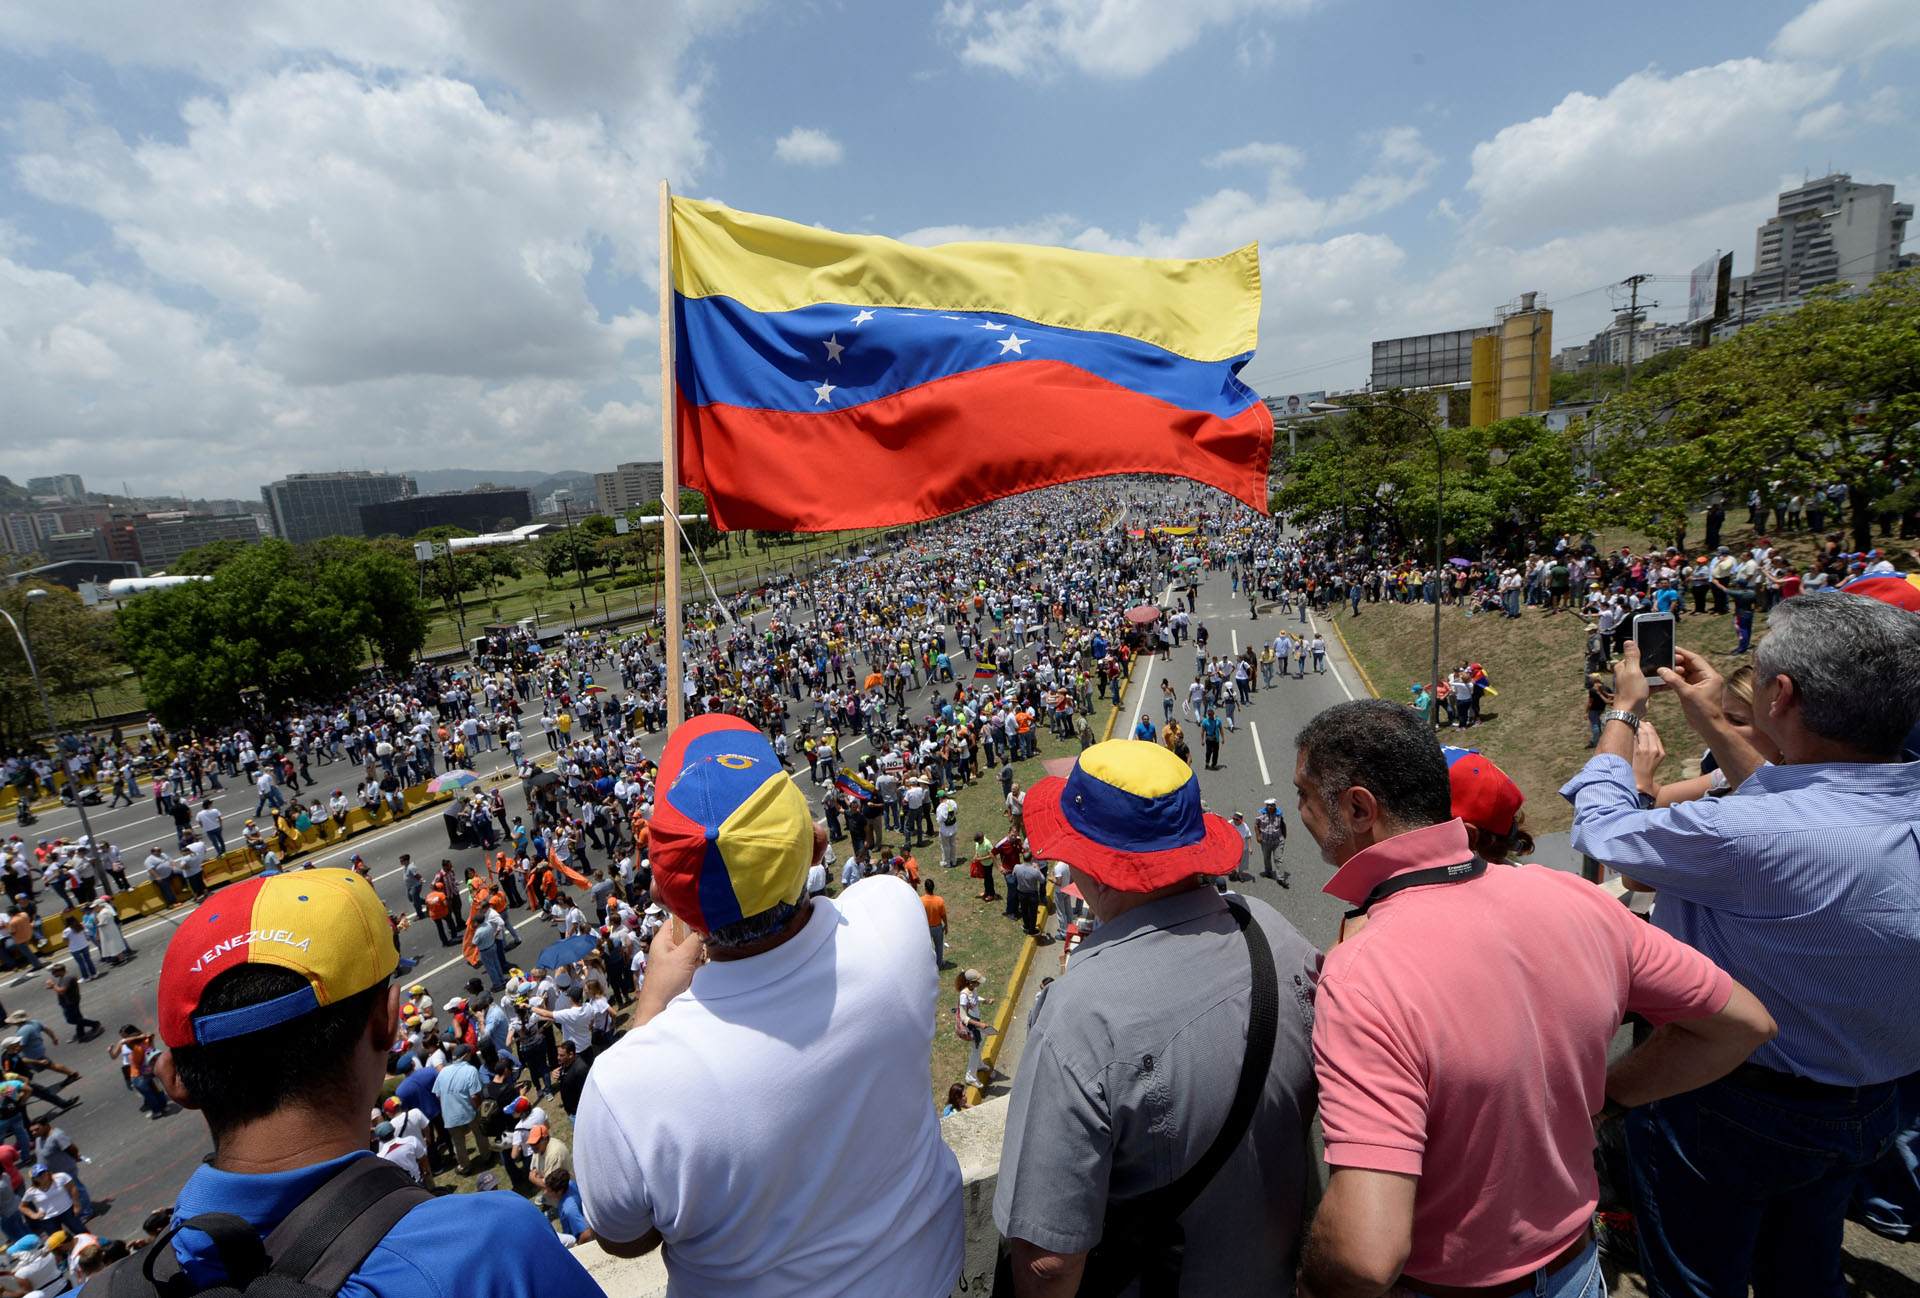 Venezuelan opposition activists gather to protest against the government of President Nicolas Maduro on April 6, 2017 in Caracas. The center-right opposition vowed fresh street protests -after earlier unrest left dozens of people injured - to increase pressure on Maduro, whom they blame for the country's economic crisis. / AFP PHOTO / FEDERICO PARRA